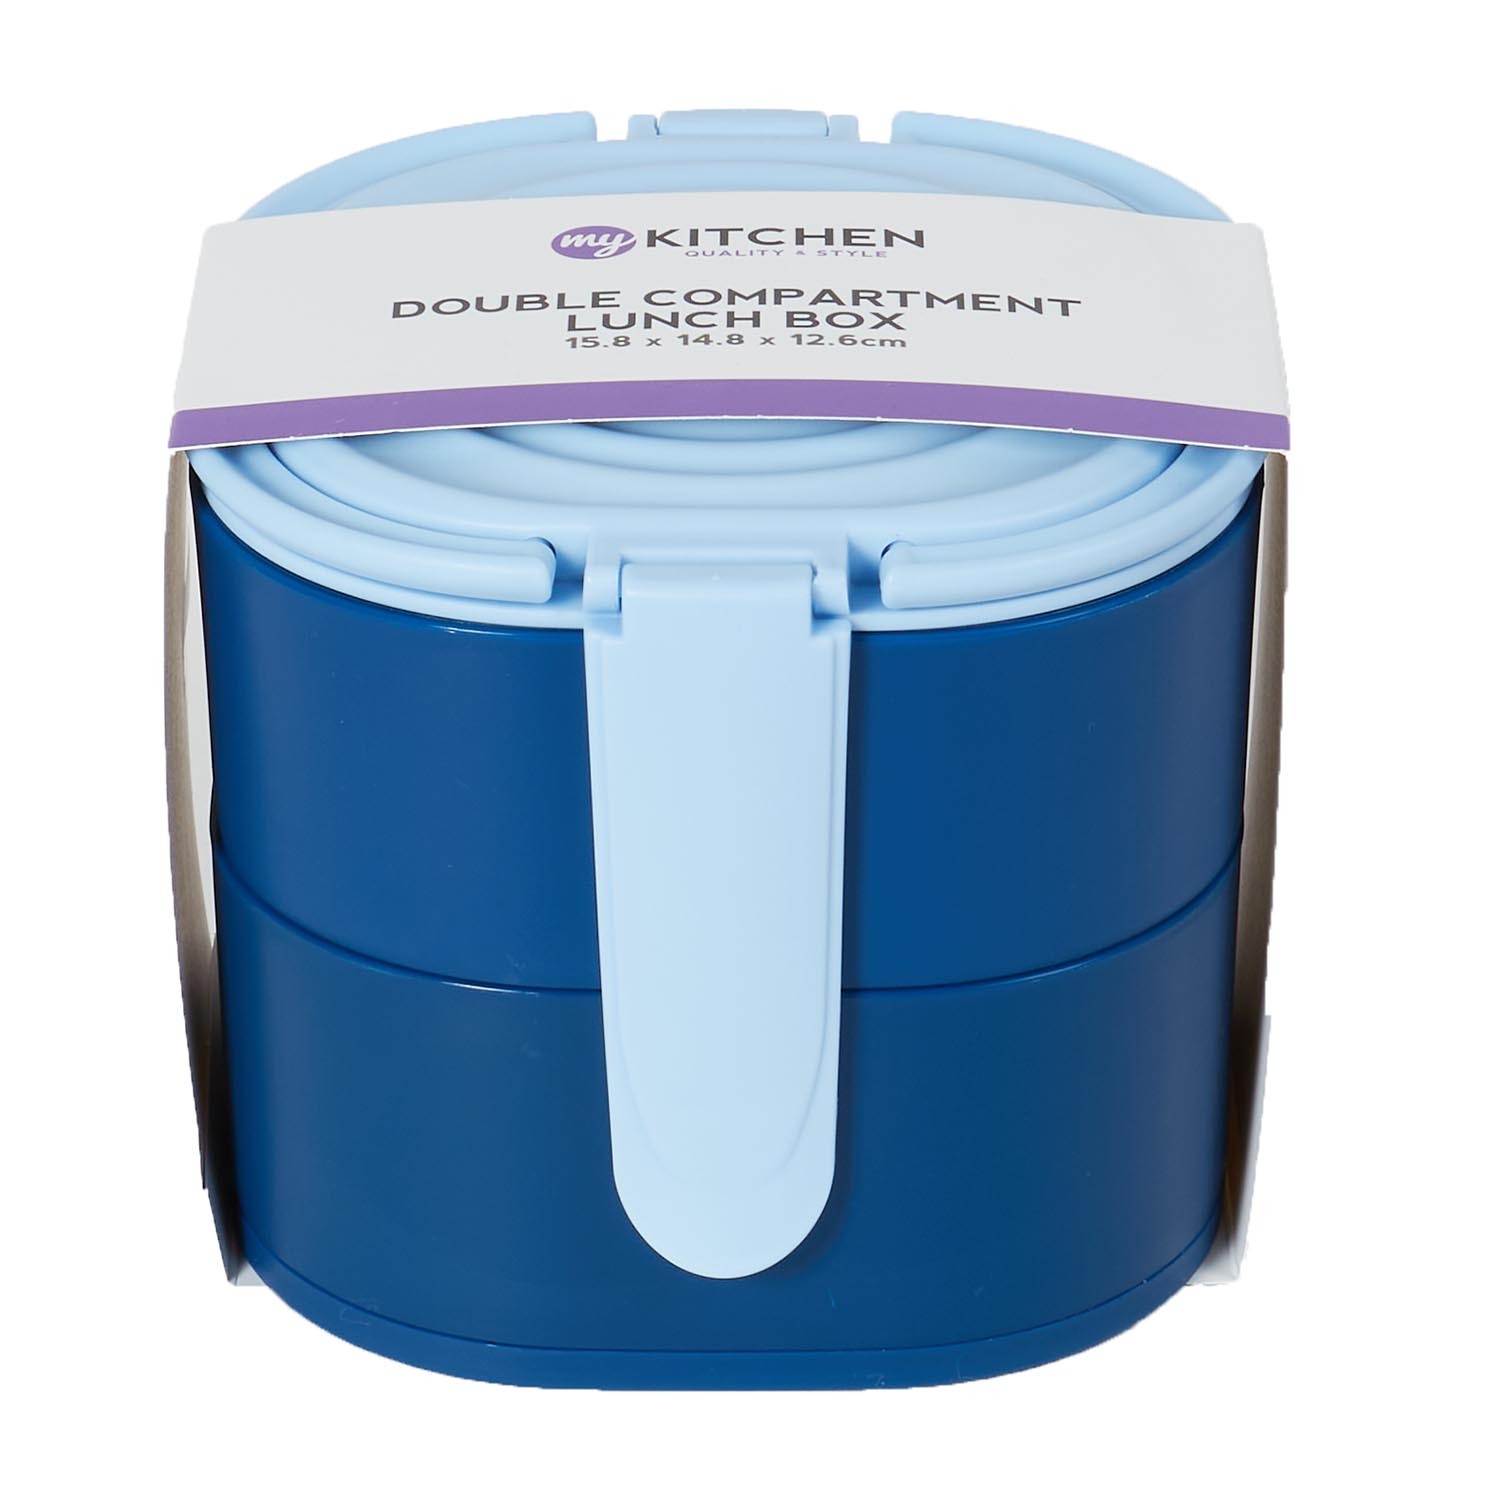 Double Compartment Lunch Box - Blue Image 1